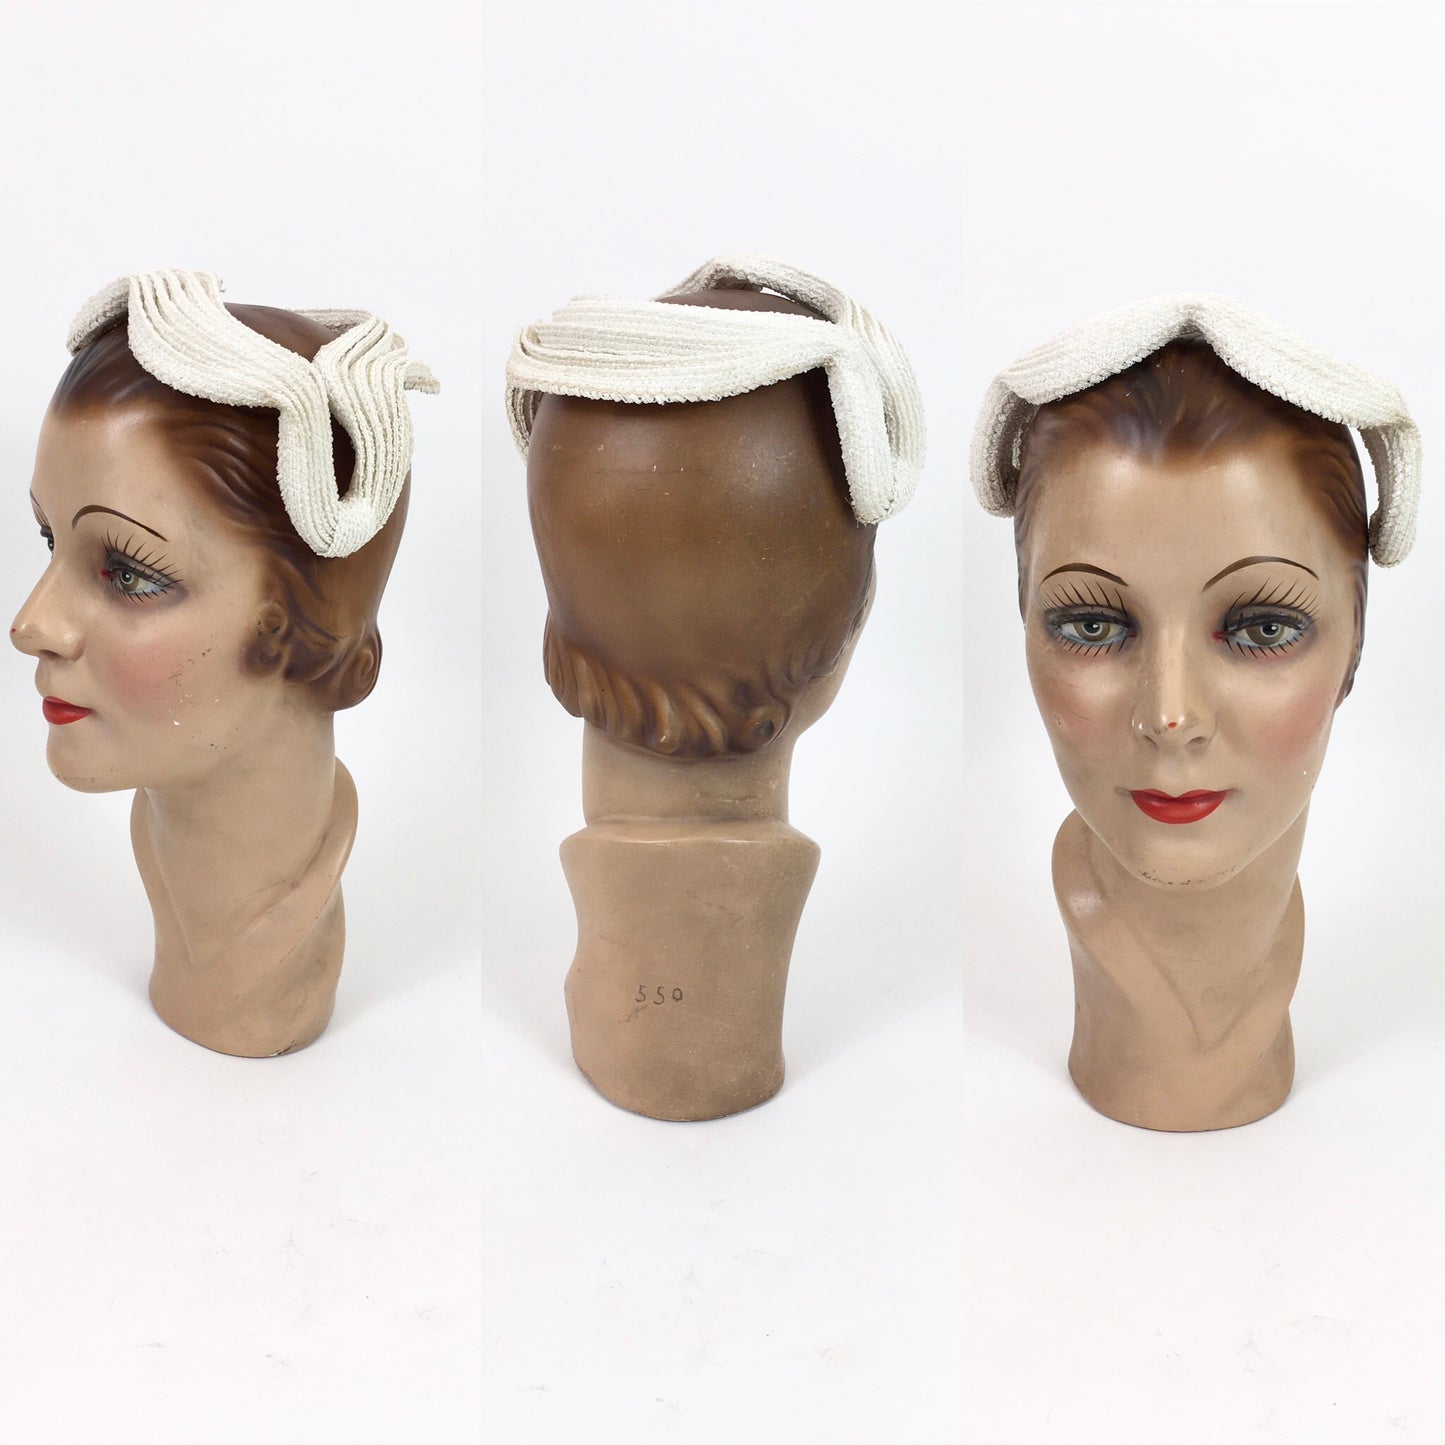 Original 1950’s Darling Ivory Headpiece - ‘ New Look’ Inspired with an Iconic Structure